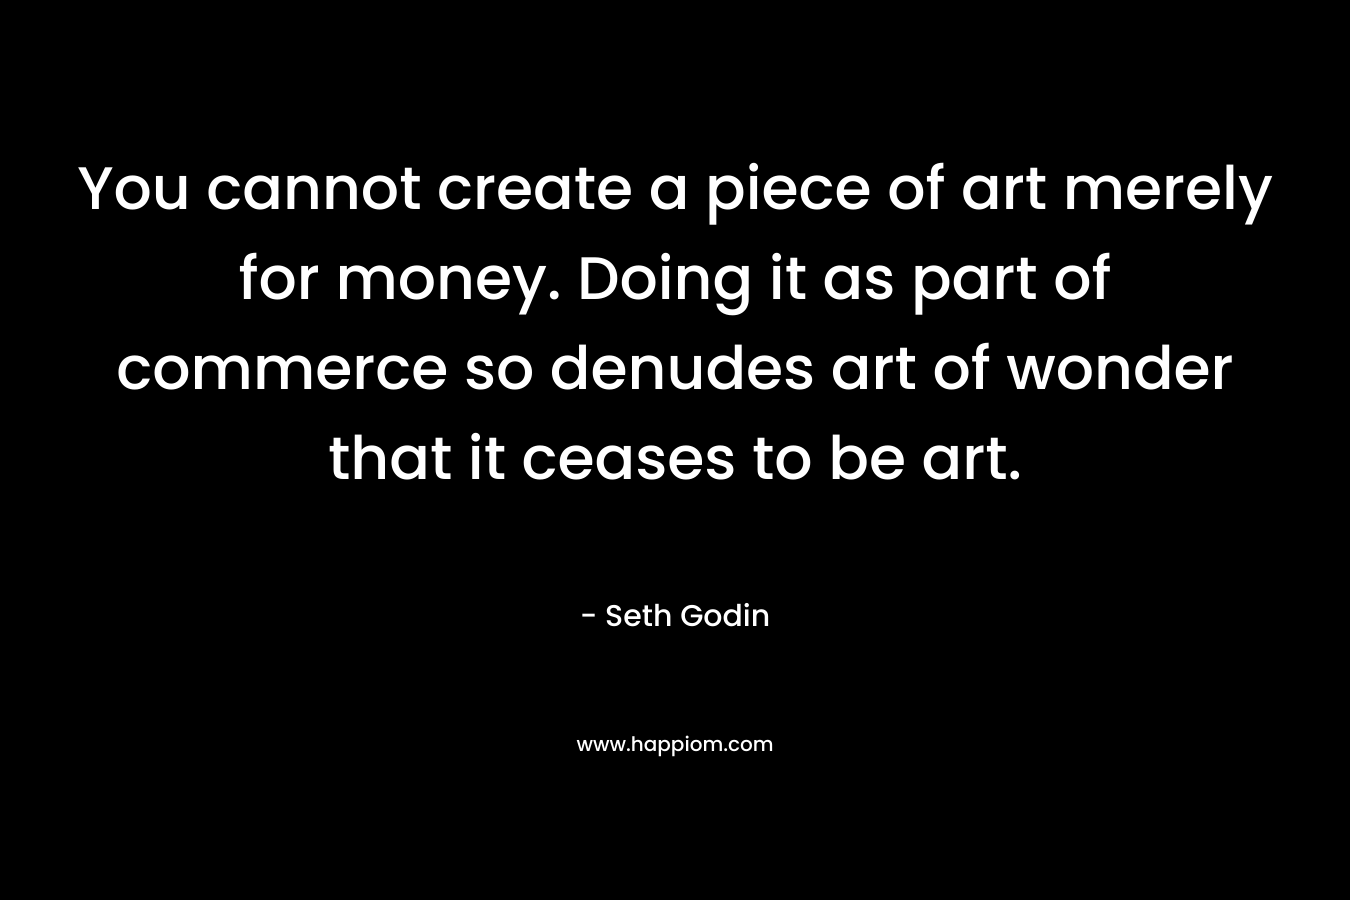 You cannot create a piece of art merely for money. Doing it as part of commerce so denudes art of wonder that it ceases to be art. – Seth Godin